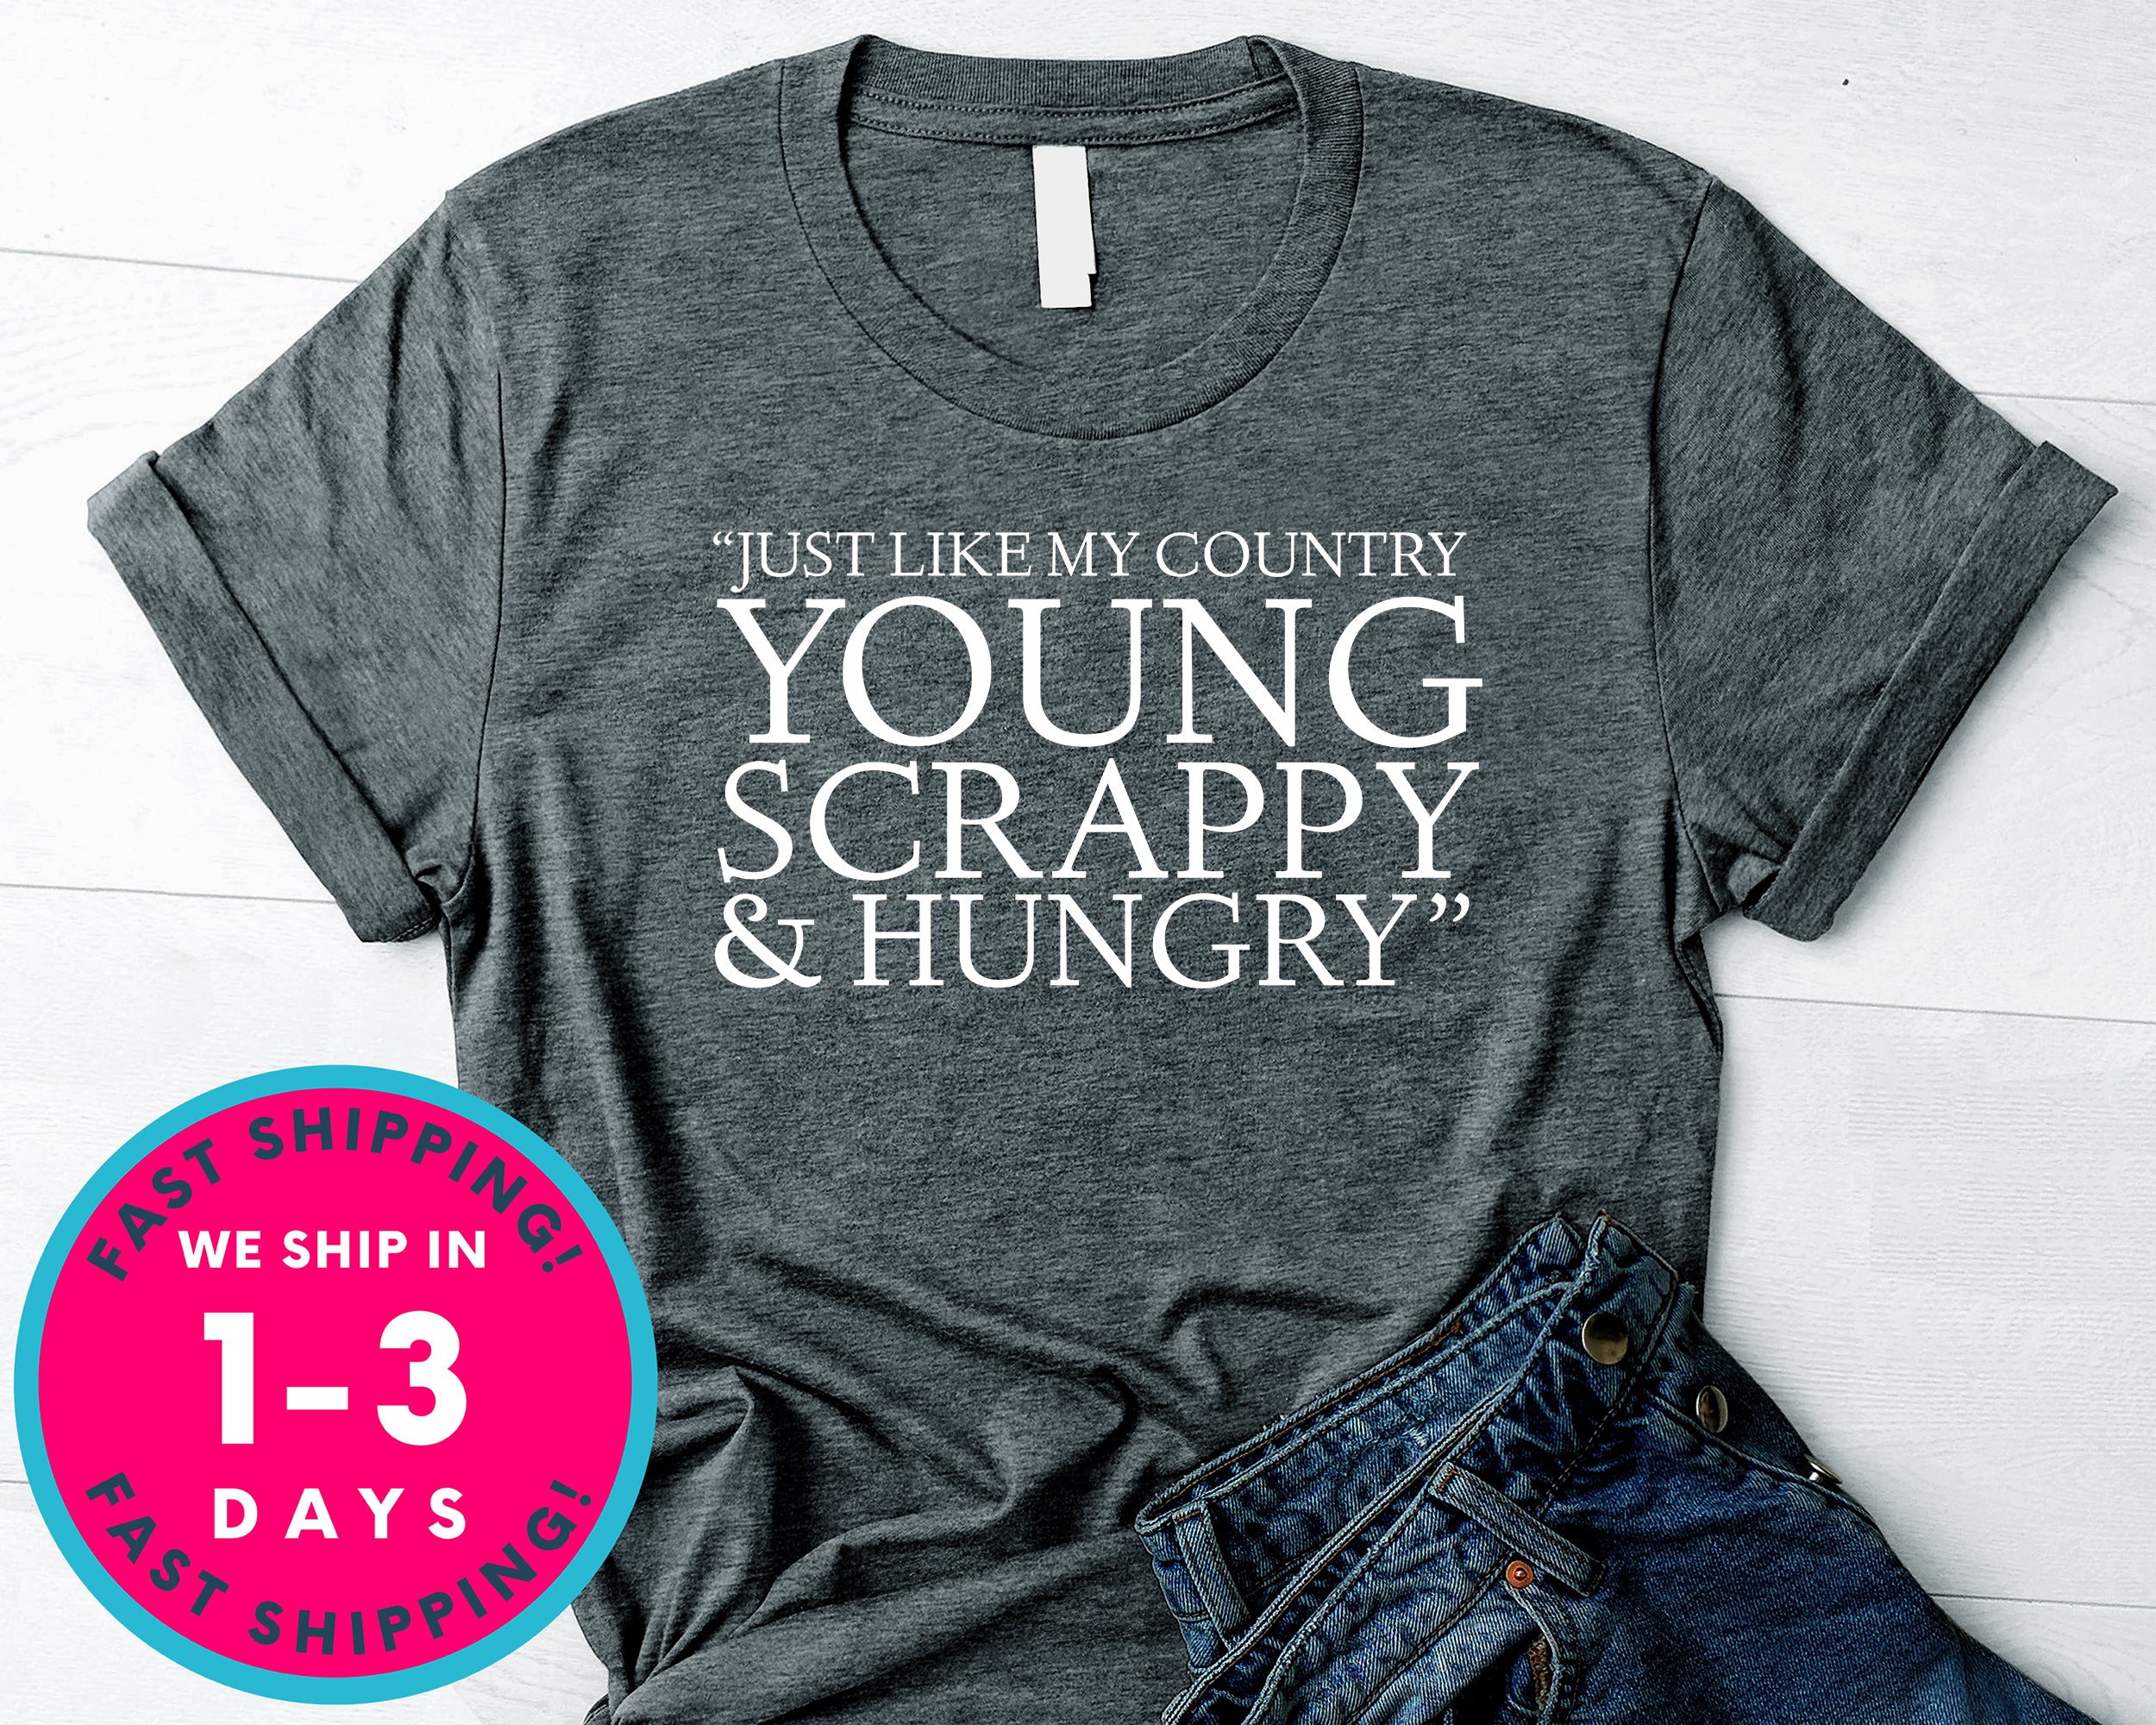 Just Like My Country Young Scrappy And Hungry T-Shirt - Funny Humor Shirt